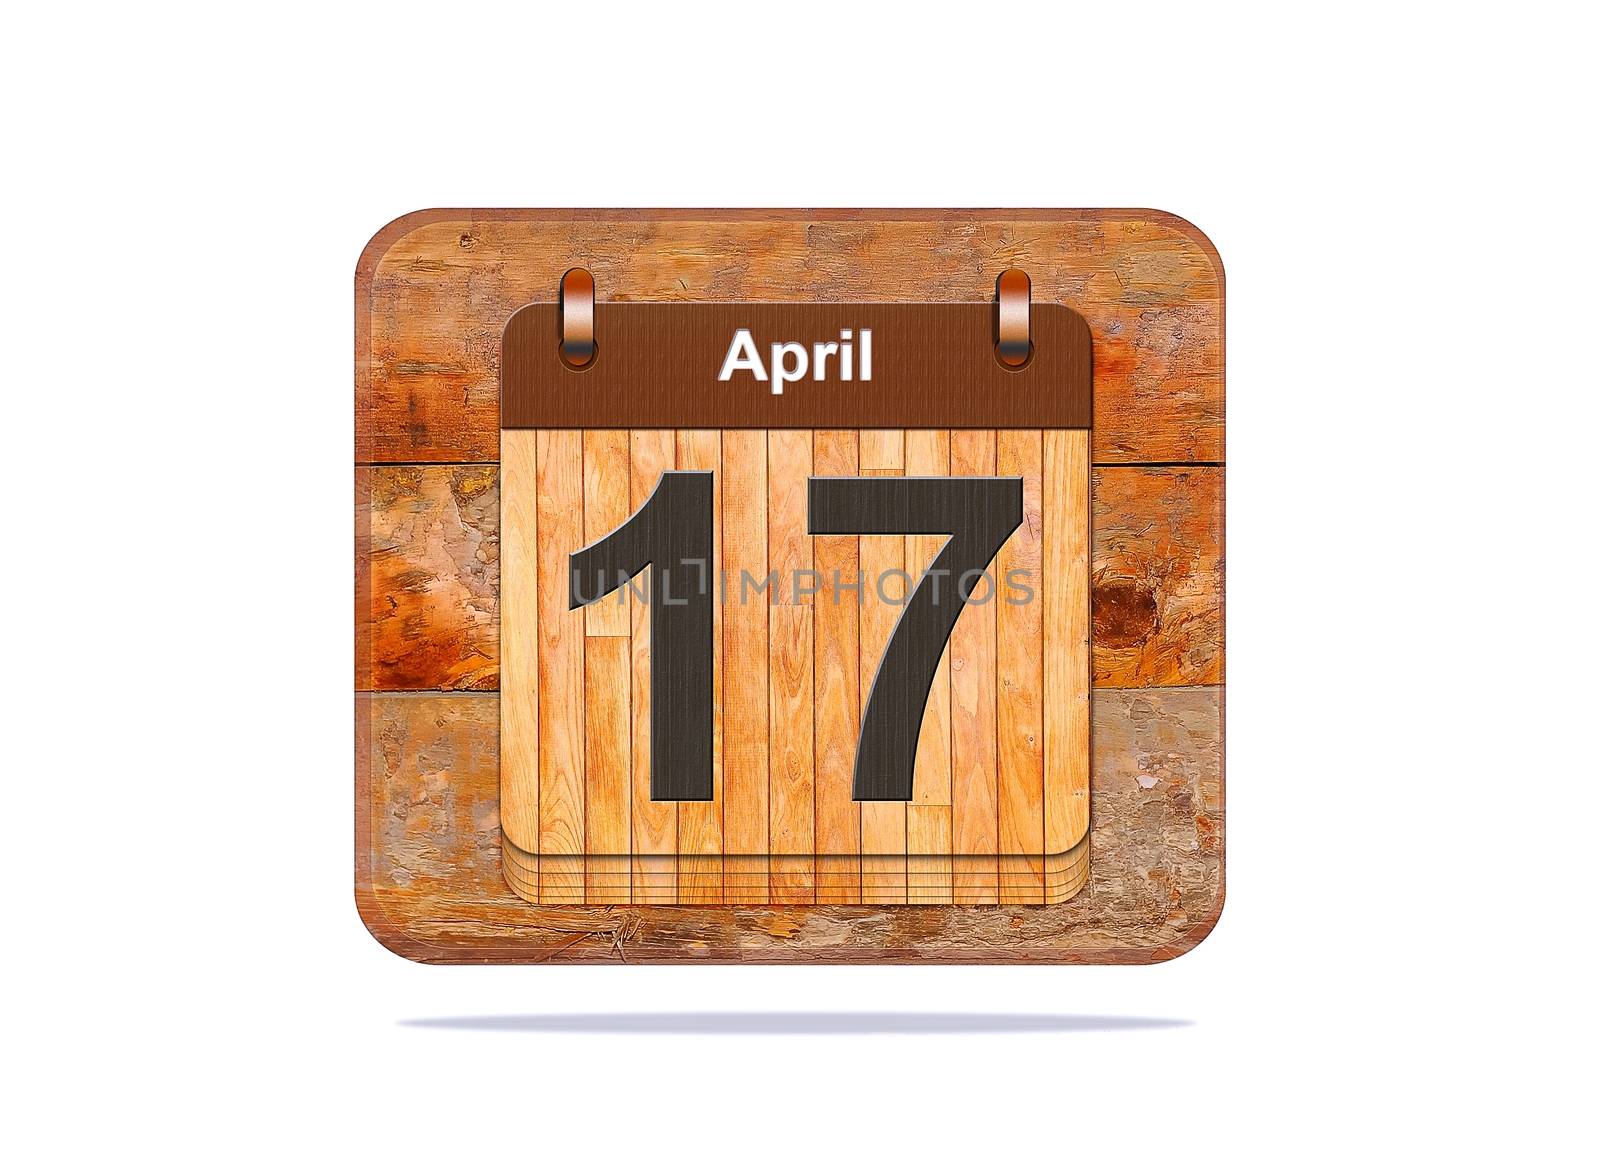 Calendar with the date of April 17.